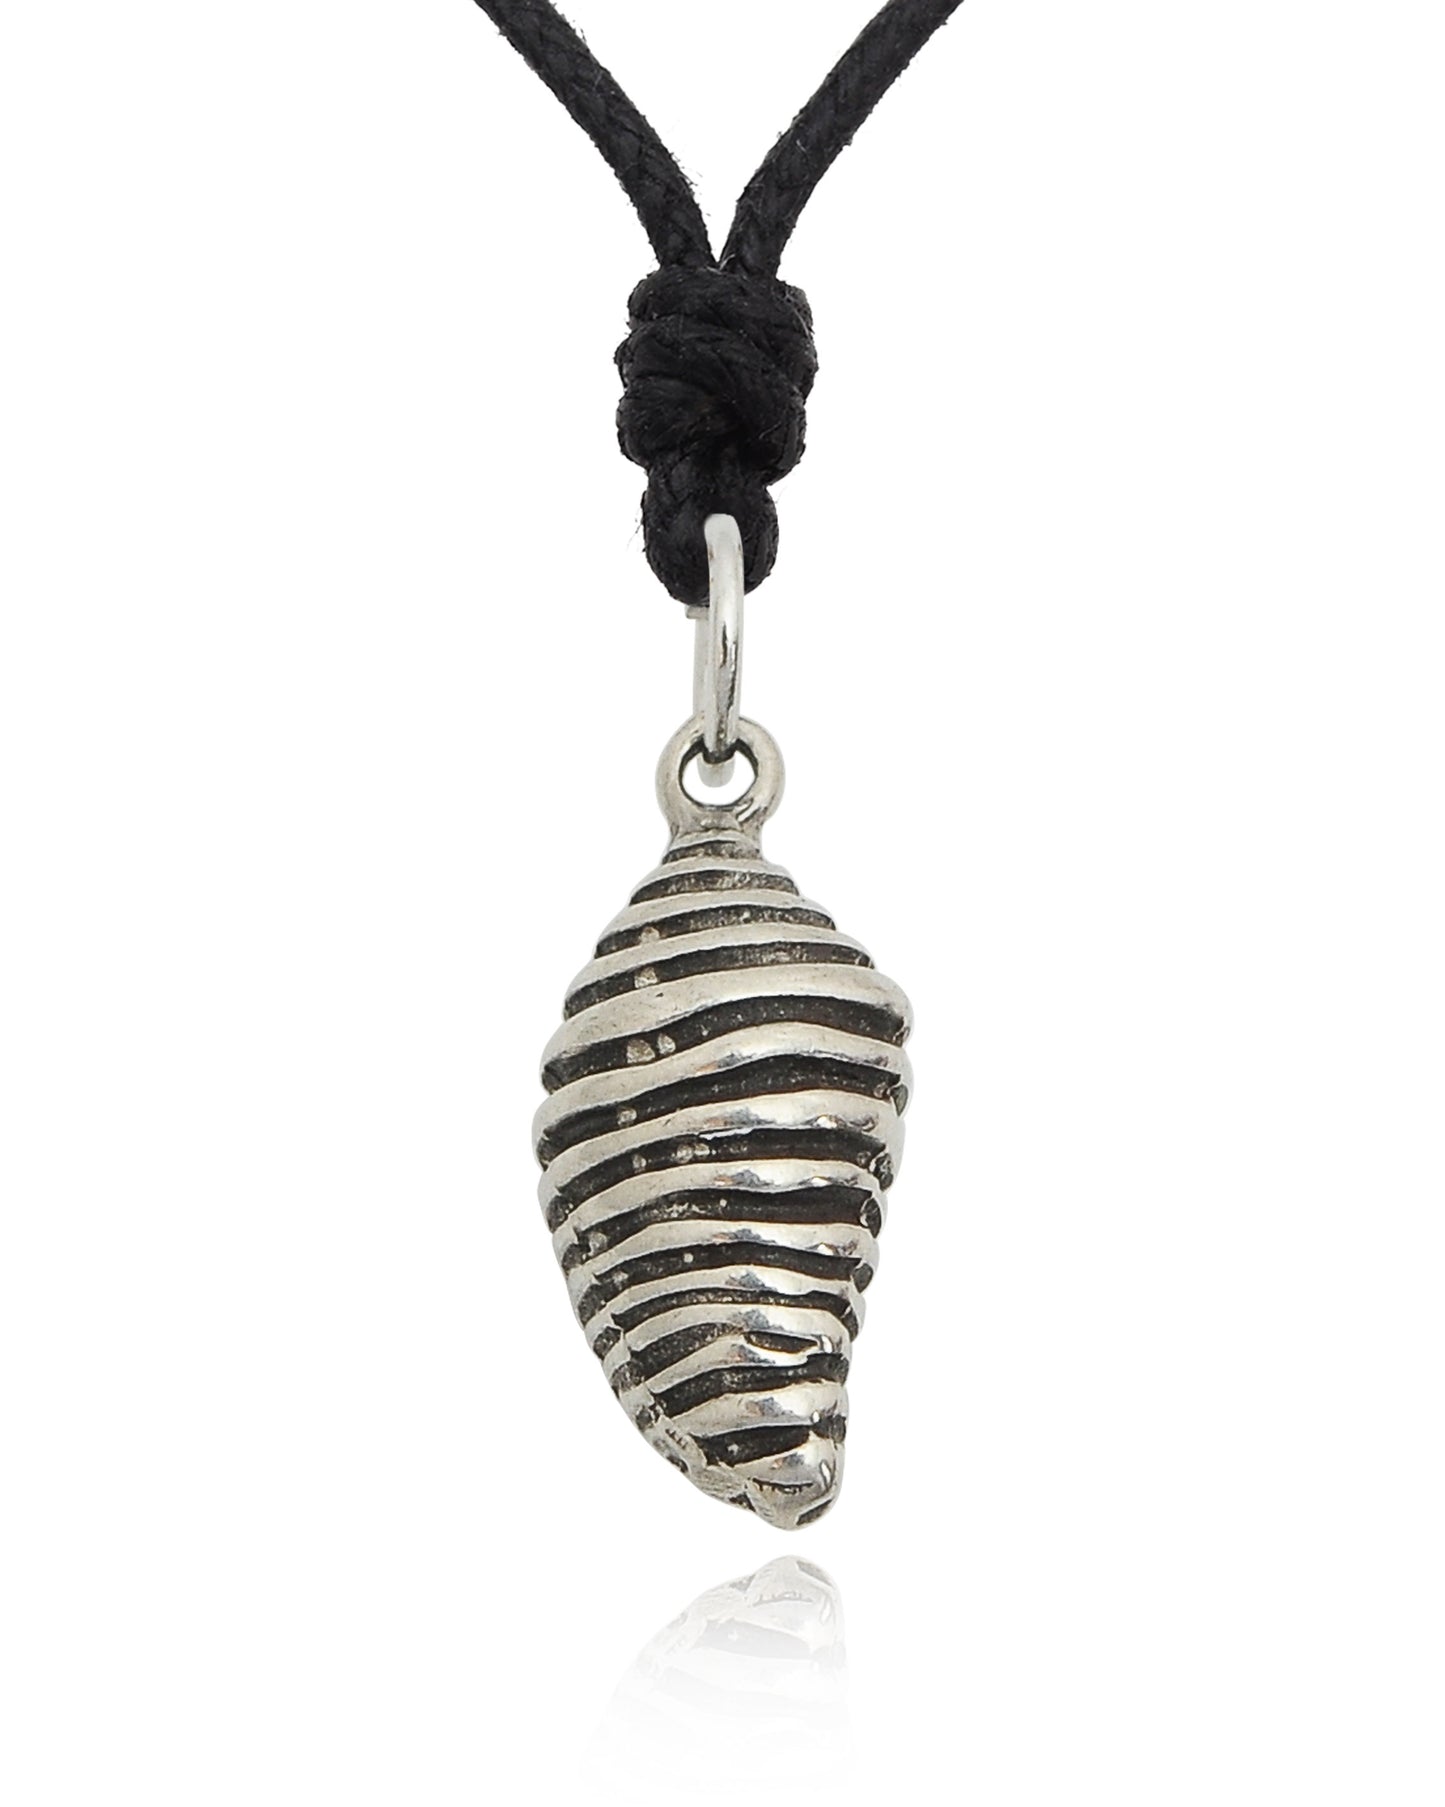 Mini Conch Seashell Silver Pewter Necklace Pendant Jewelry